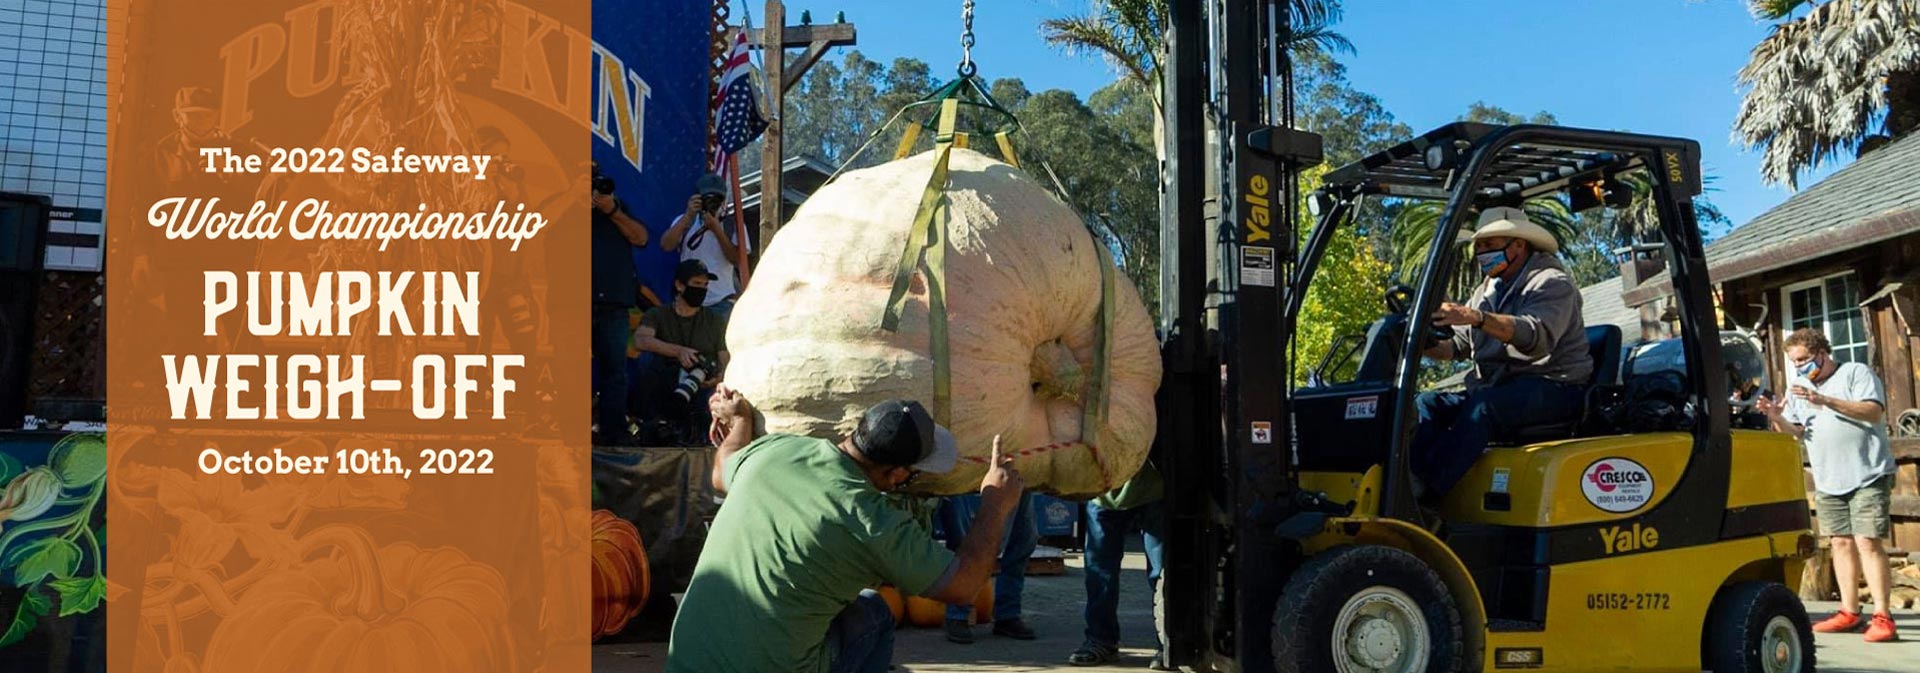 Learn more about the 2022 Safeway World Championship Pumpkin Weigh-Off on October 10th